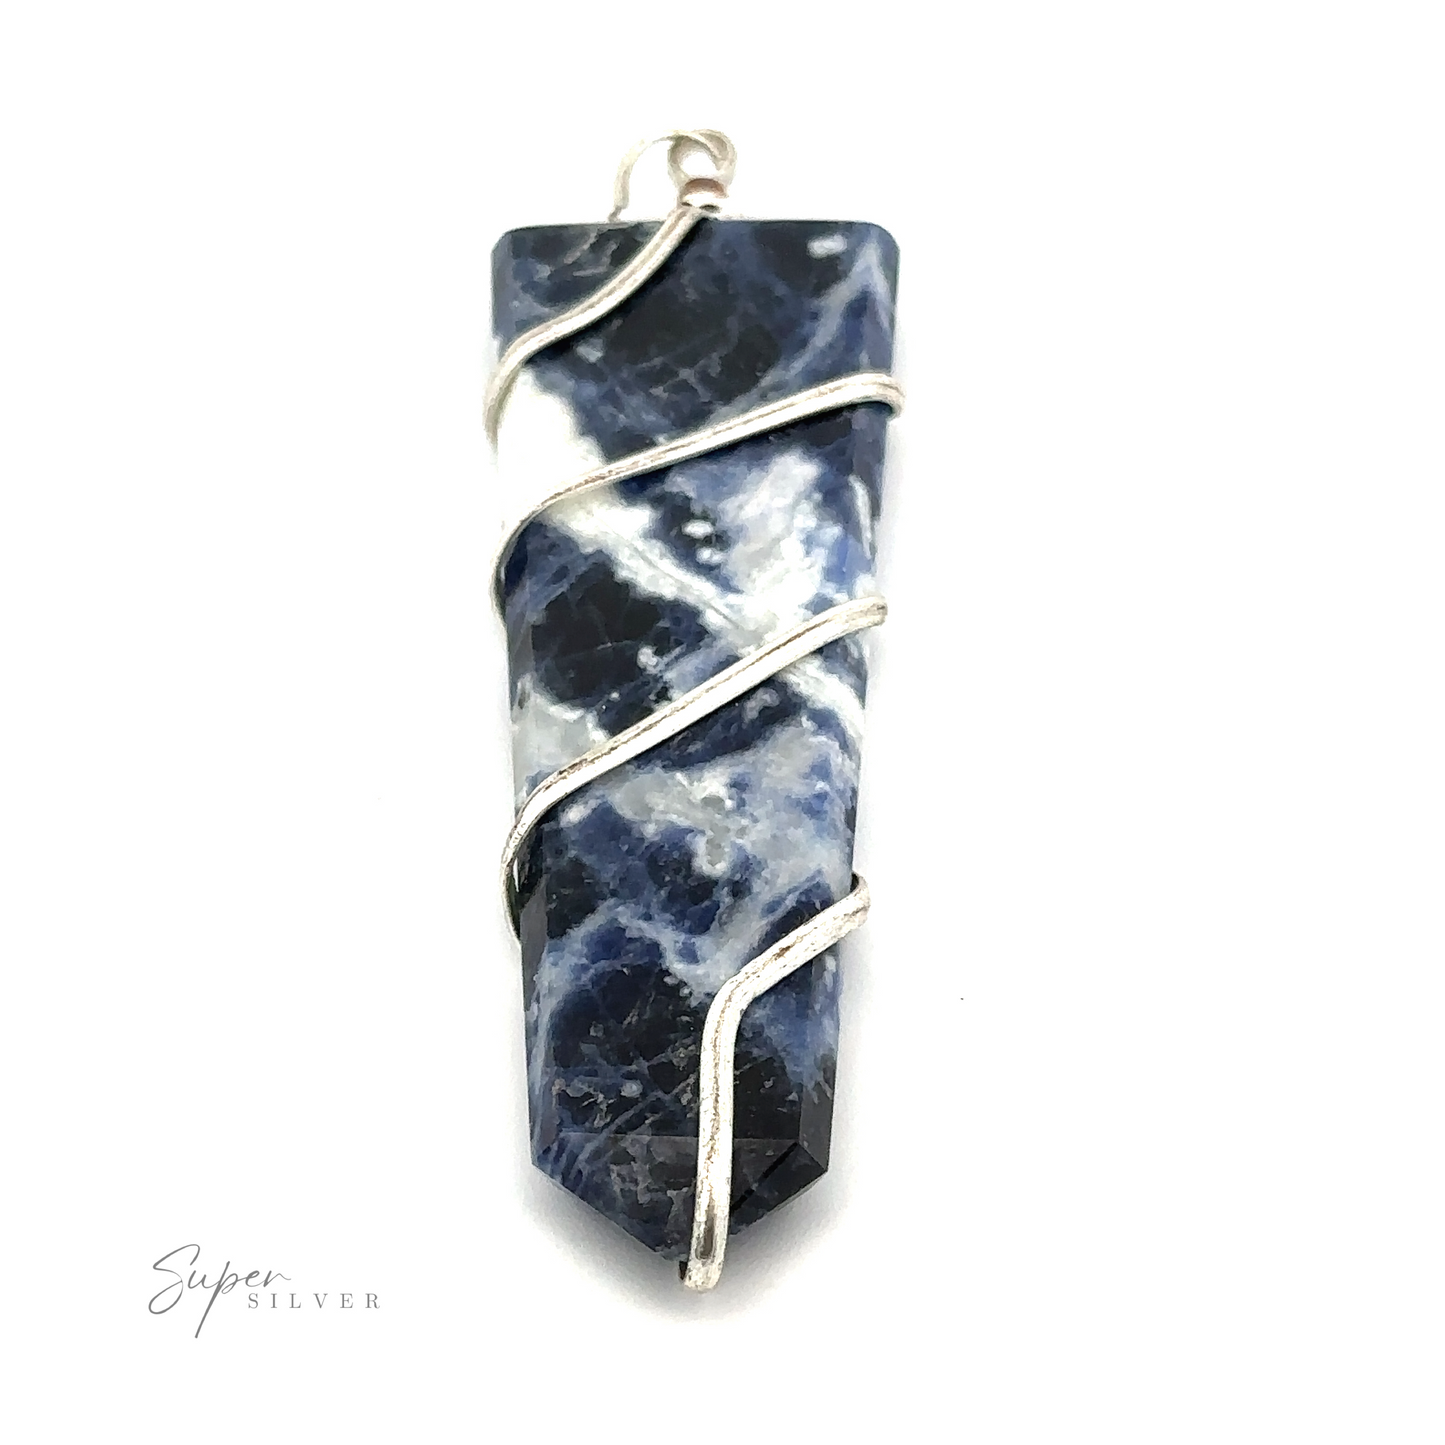 
                  
                    A hexagonal blue and white stone slab pendant is elegantly wrapped in silver wire, featuring a loop at the top for hanging. The logo "Super Silver" is delicately placed in the bottom left corner, adding an extra touch of sophistication to this exquisite piece of Wire Wrapped Slab Pendant jewelry.
                  
                